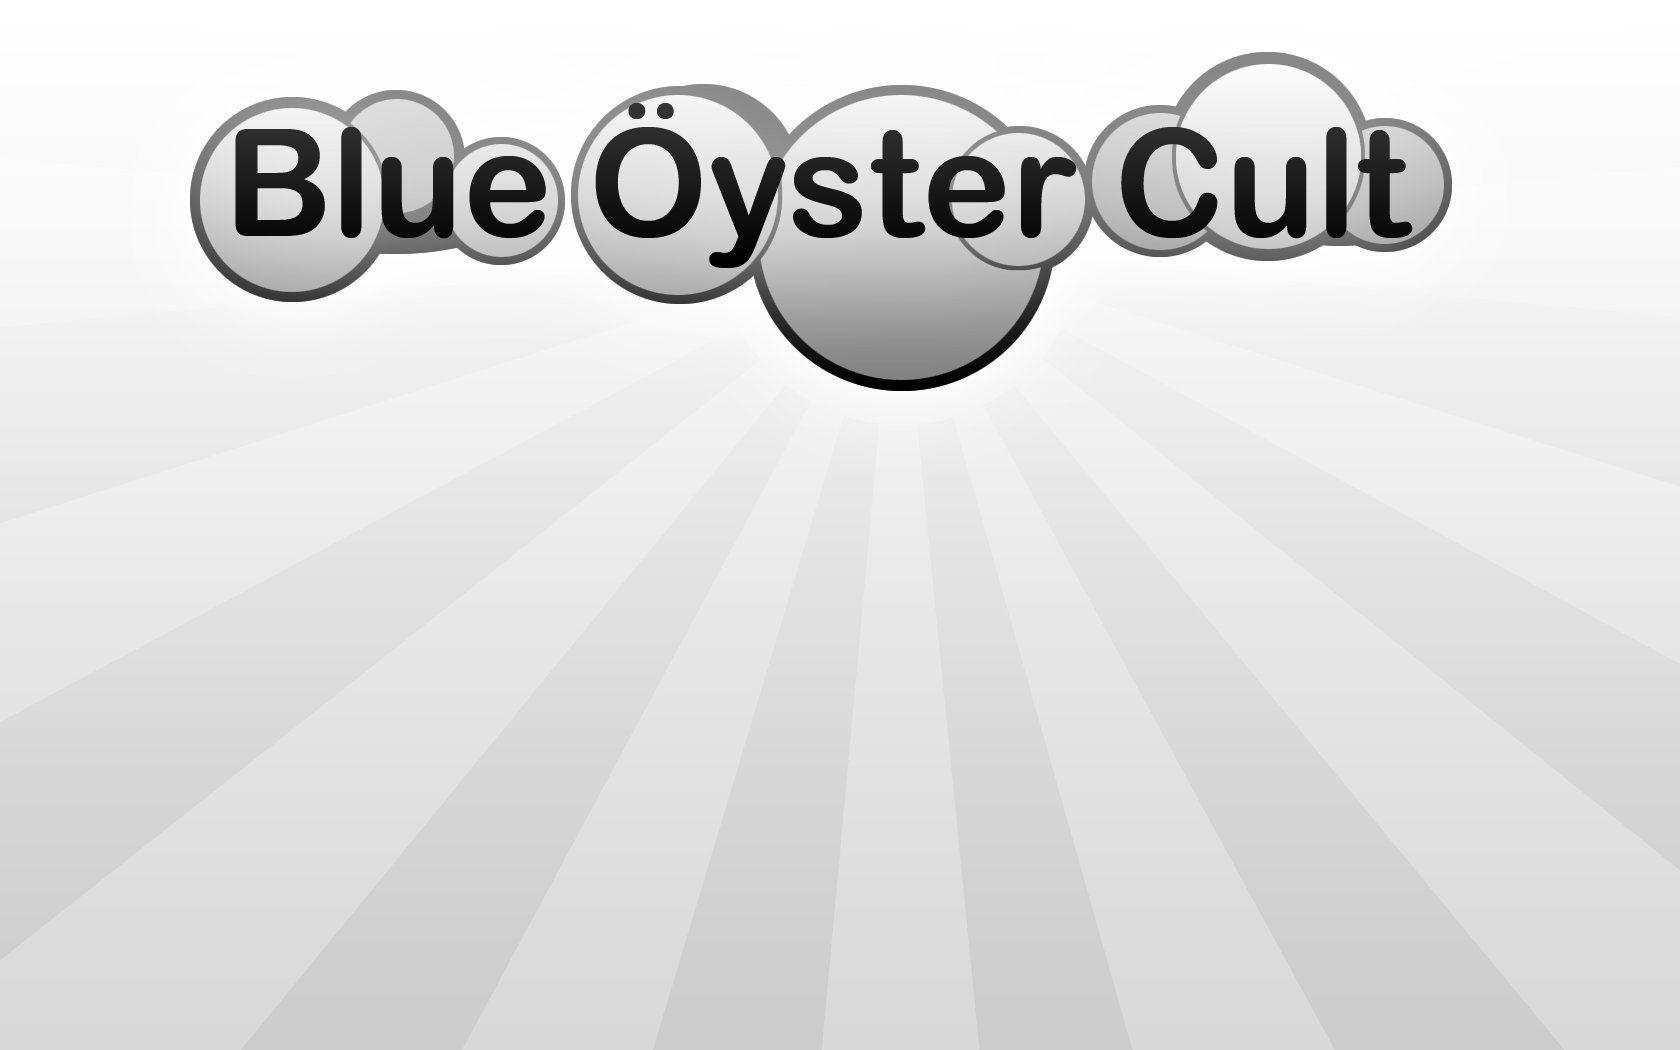 Blue Oyster Cult Wallpaper By Muffin Zack